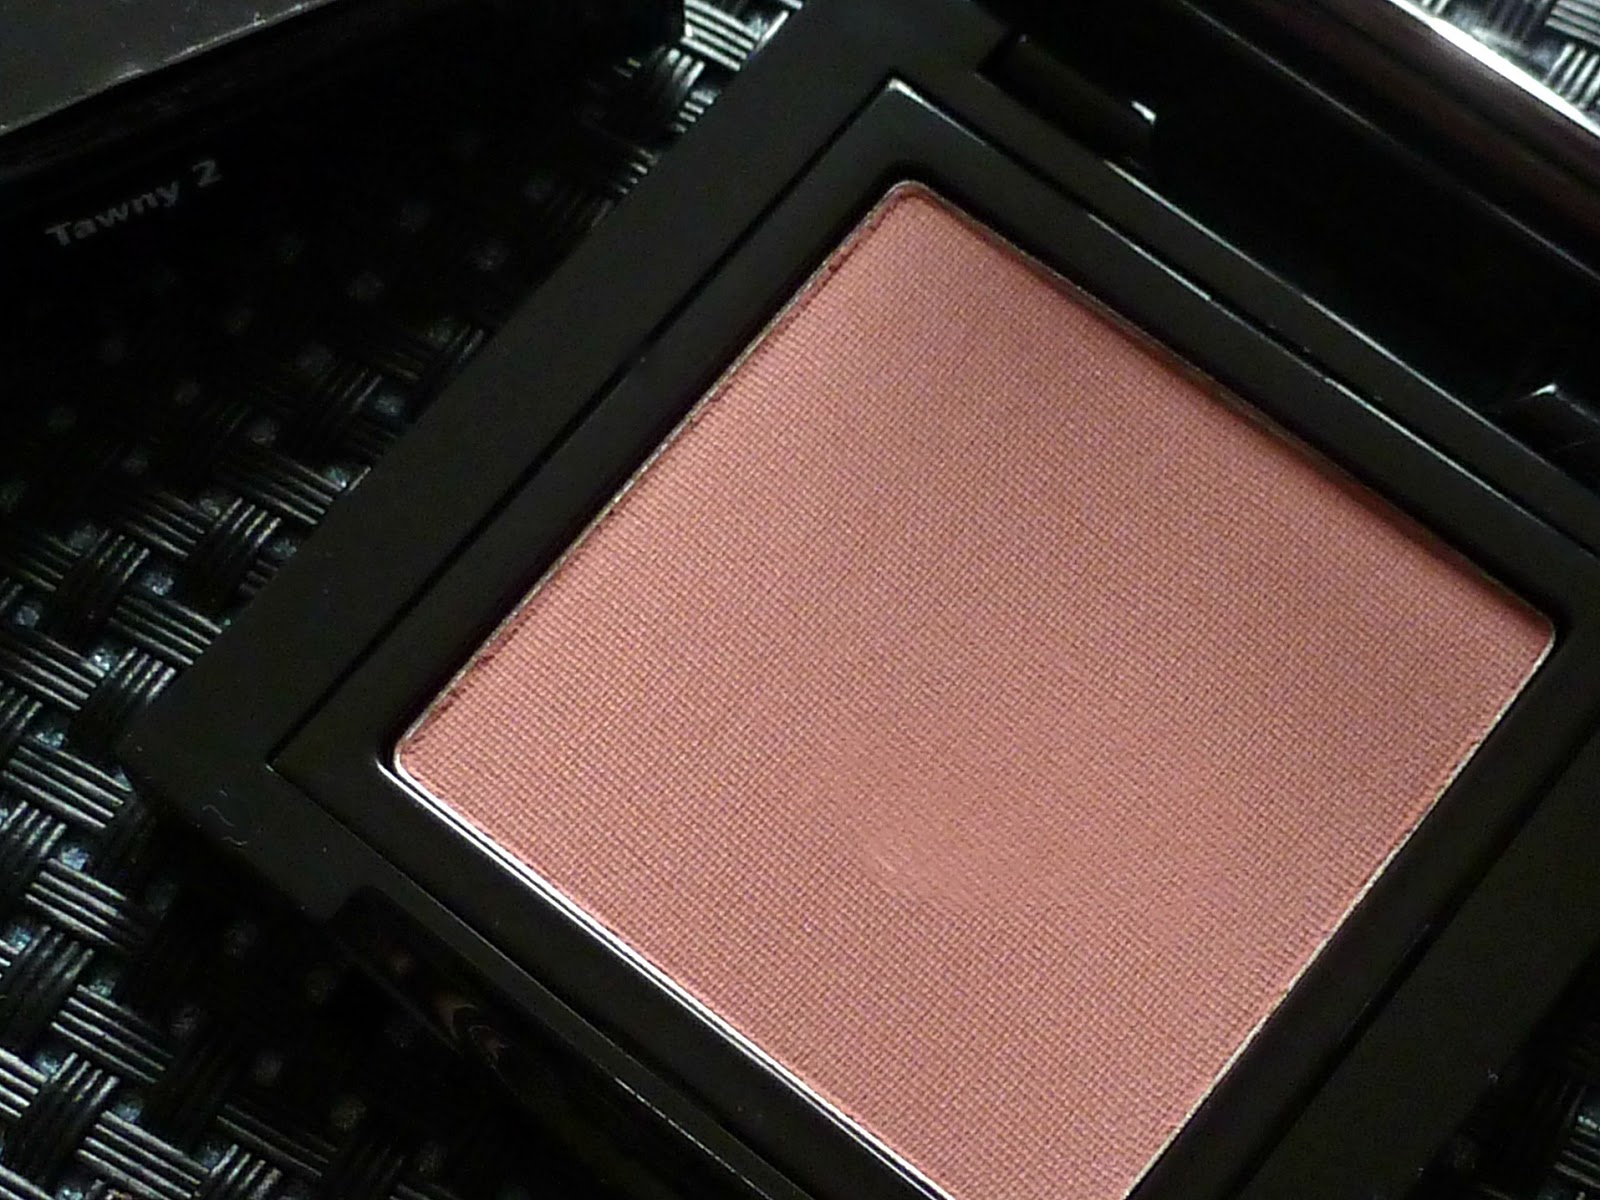 A picture of the Bobbi Brown Blush in Tawny